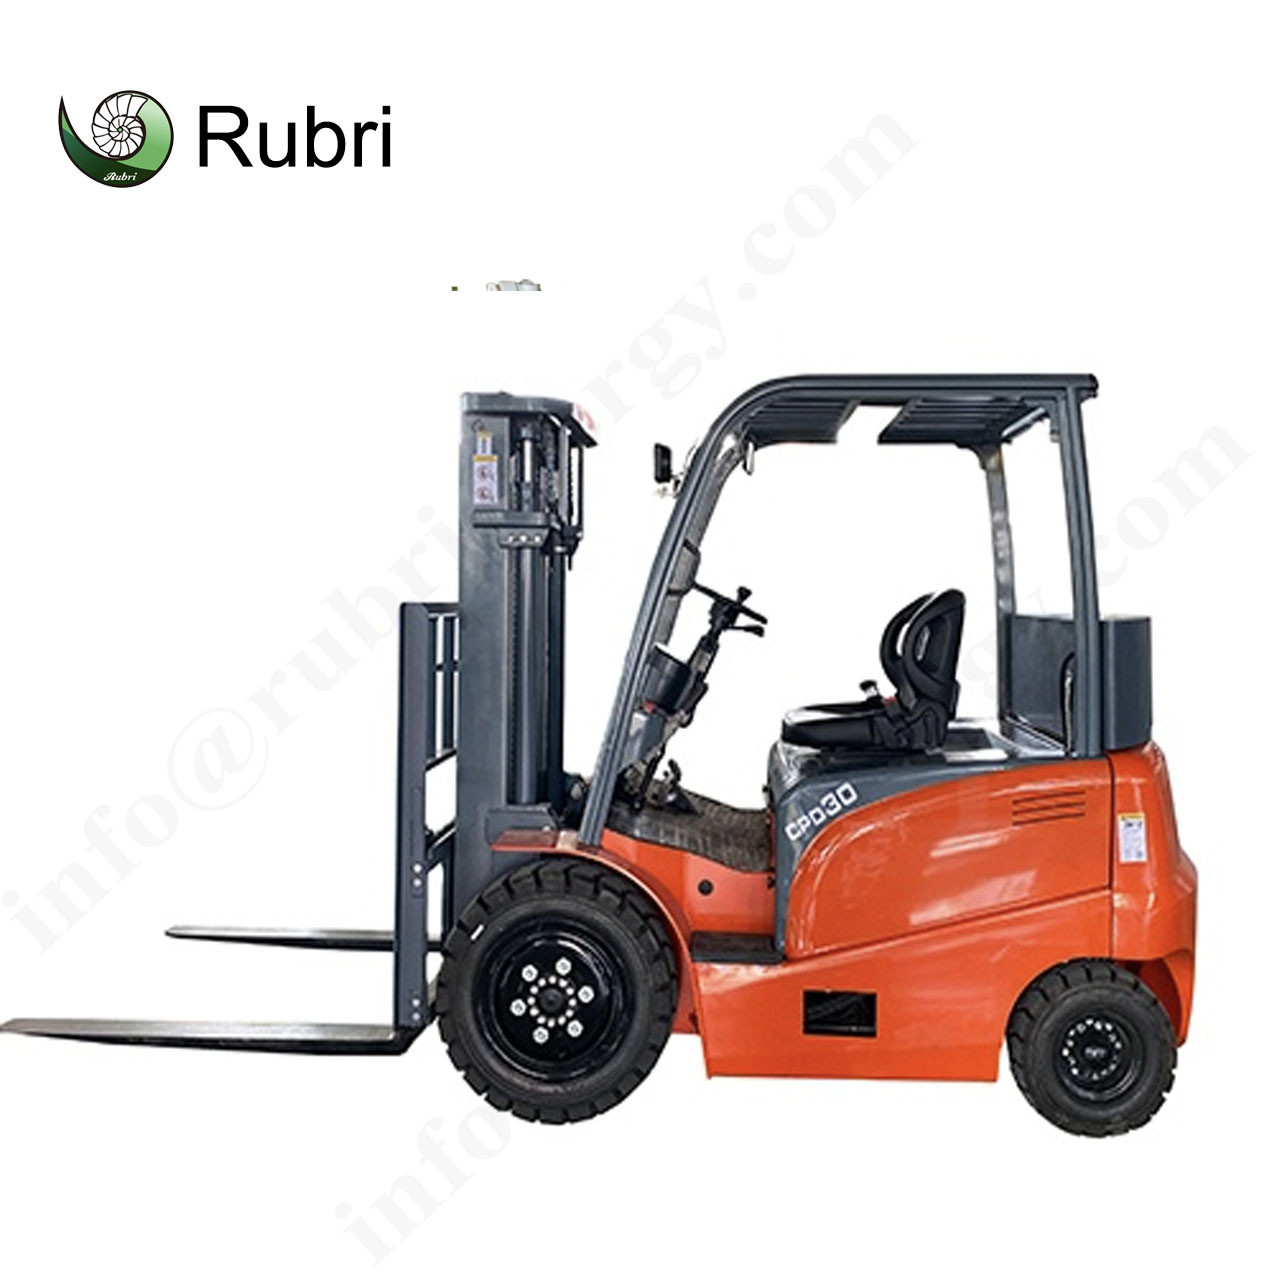 Hydrogen Fuel Cell Powered Counterbalanced Forklift Trucks